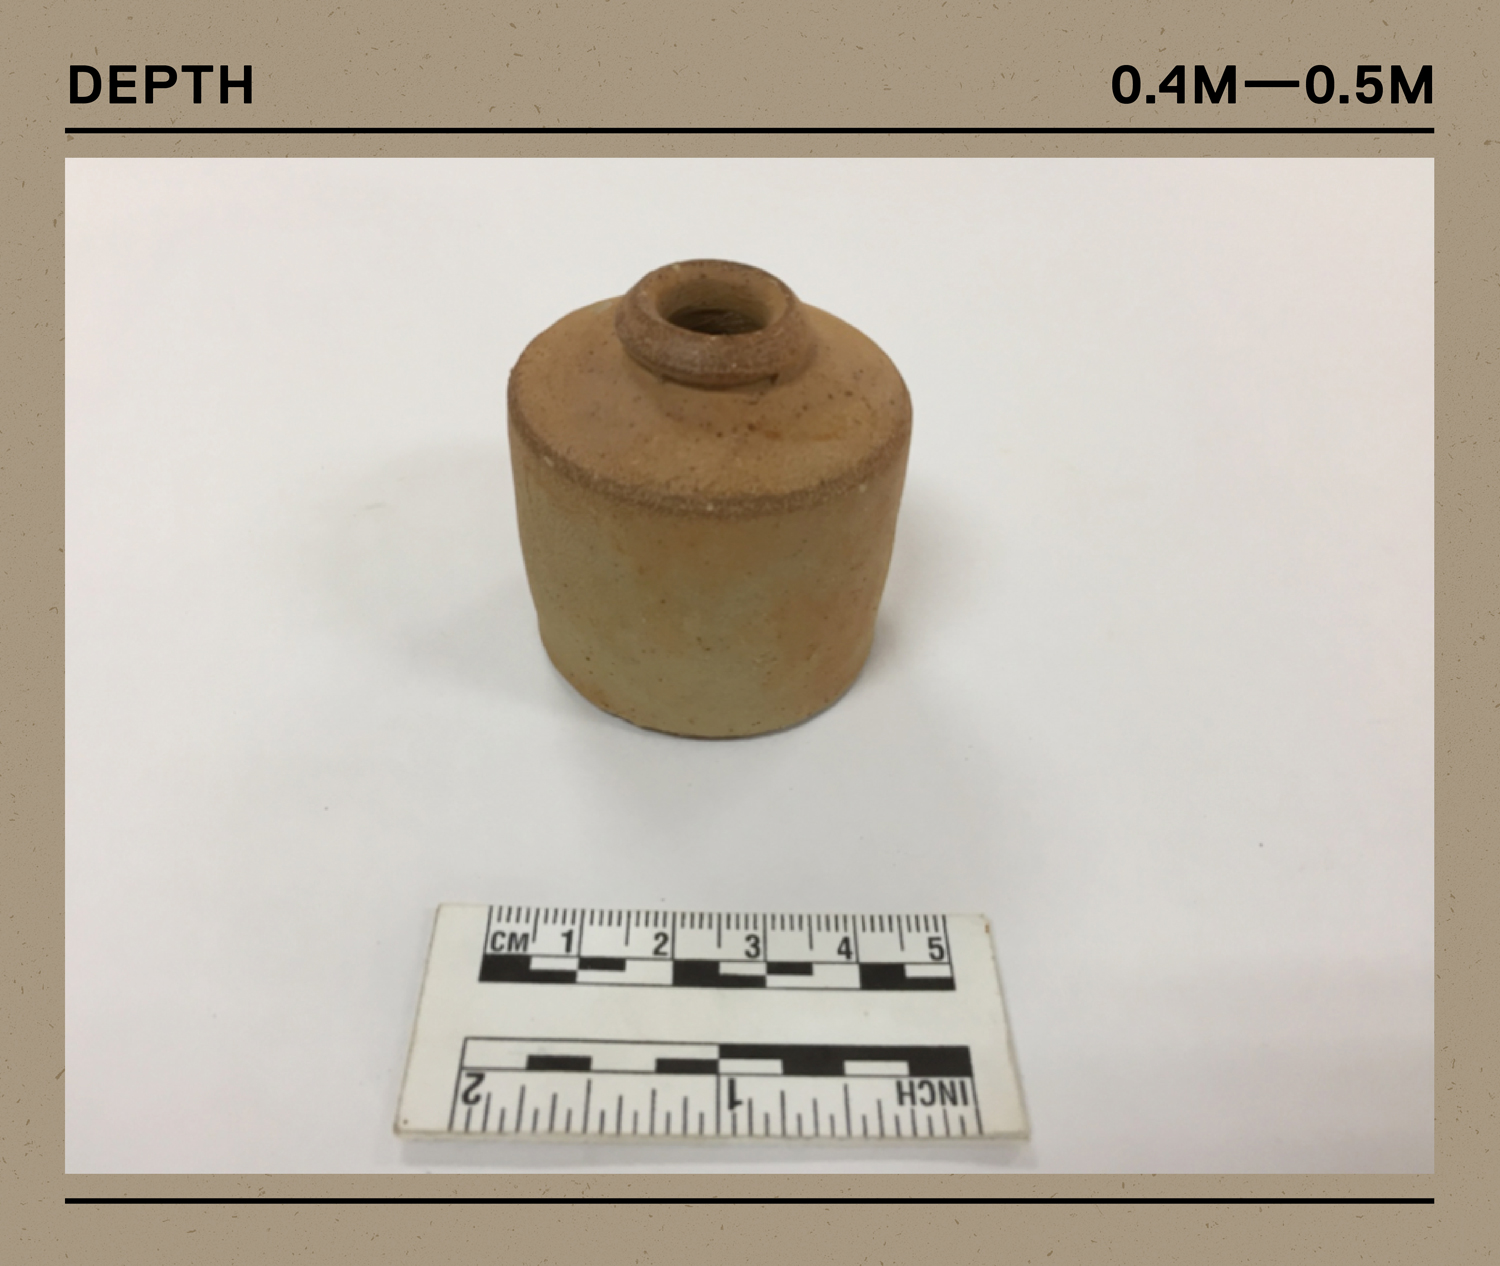 The oldest artefact discovered was a European stoneware ink bottle from the mid-19th century 